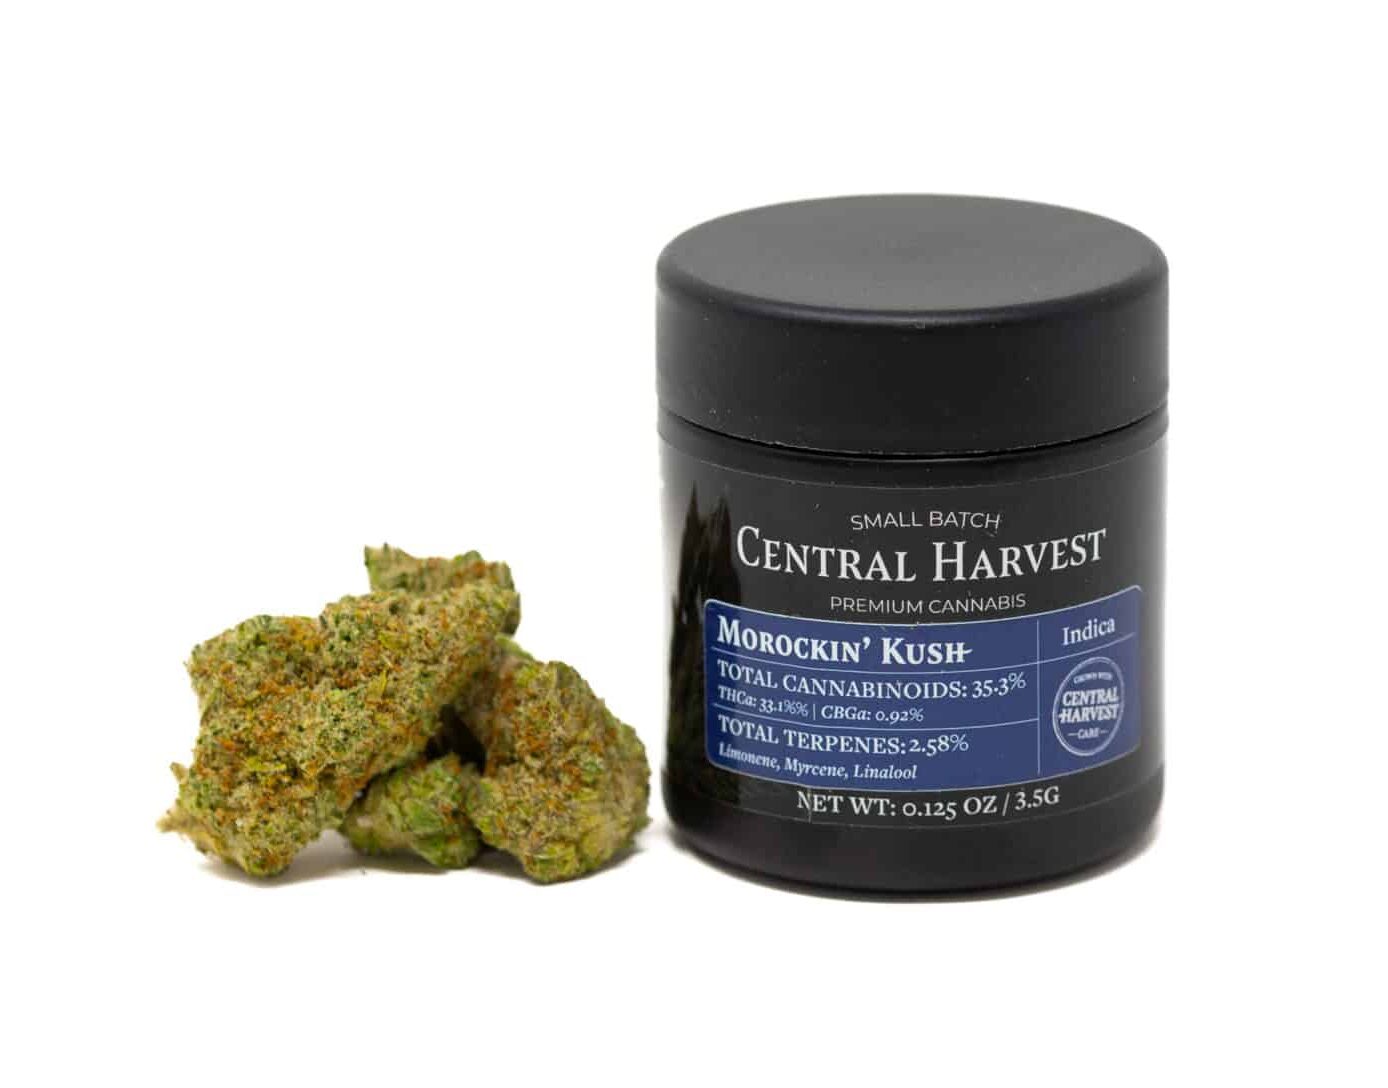 Morockin' Kush is an Indica Cannabis strain grown by Central Harvest